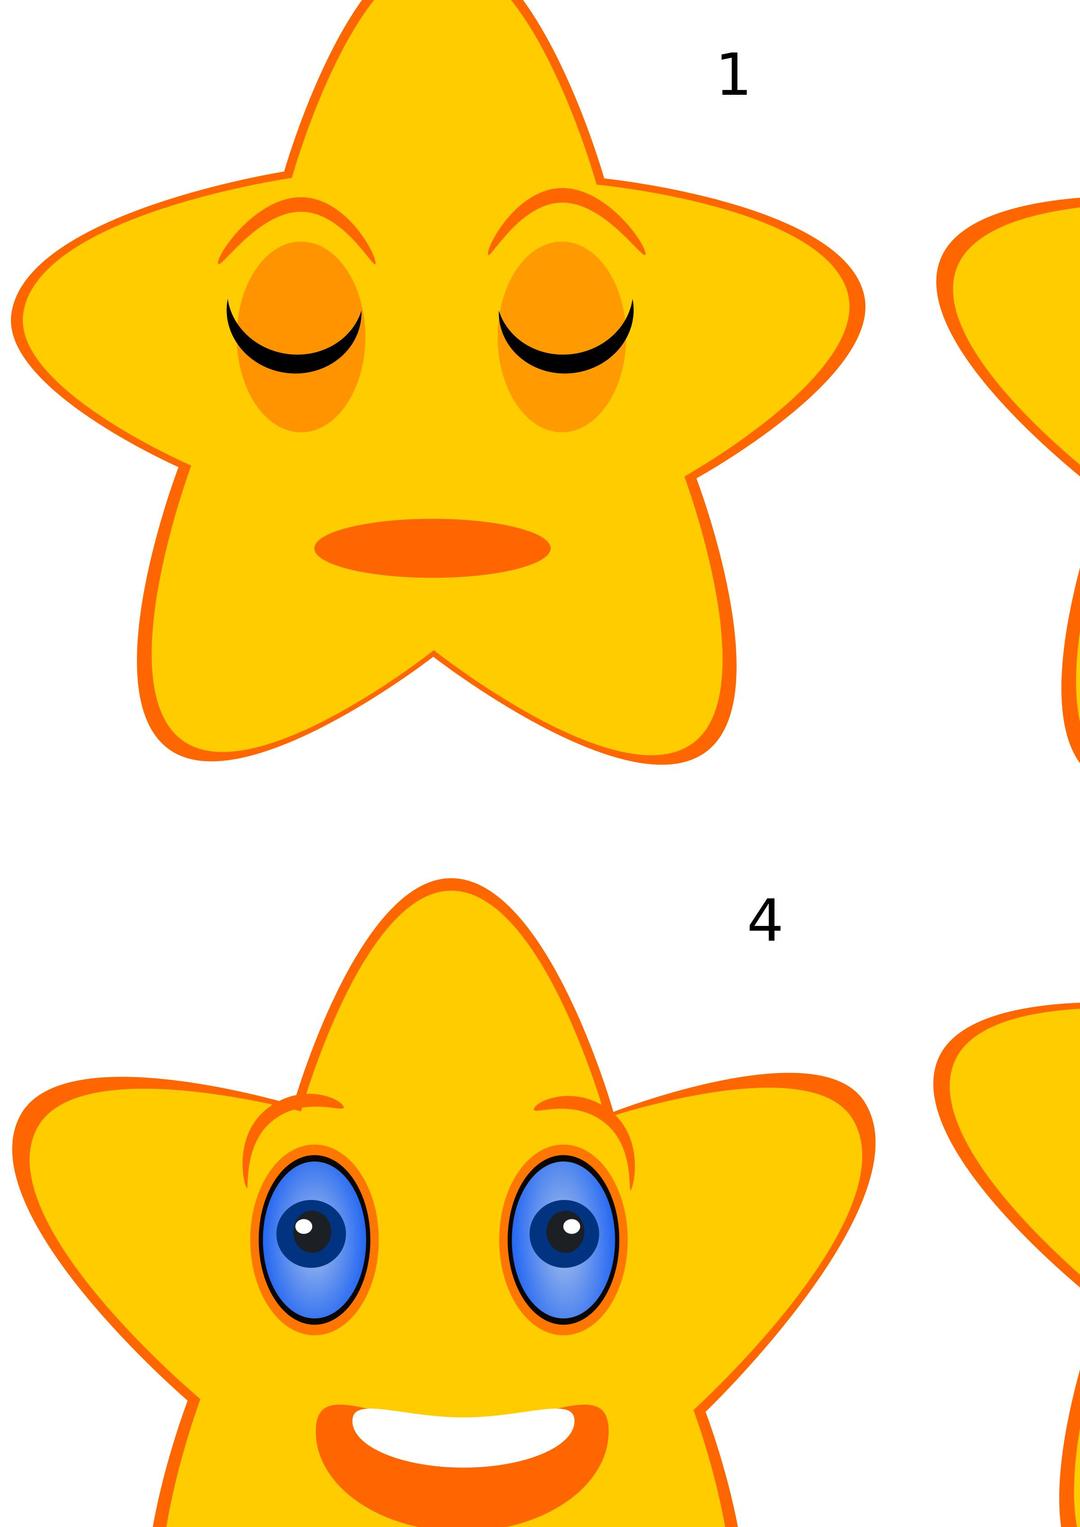 Animated Sleeping Star png transparent